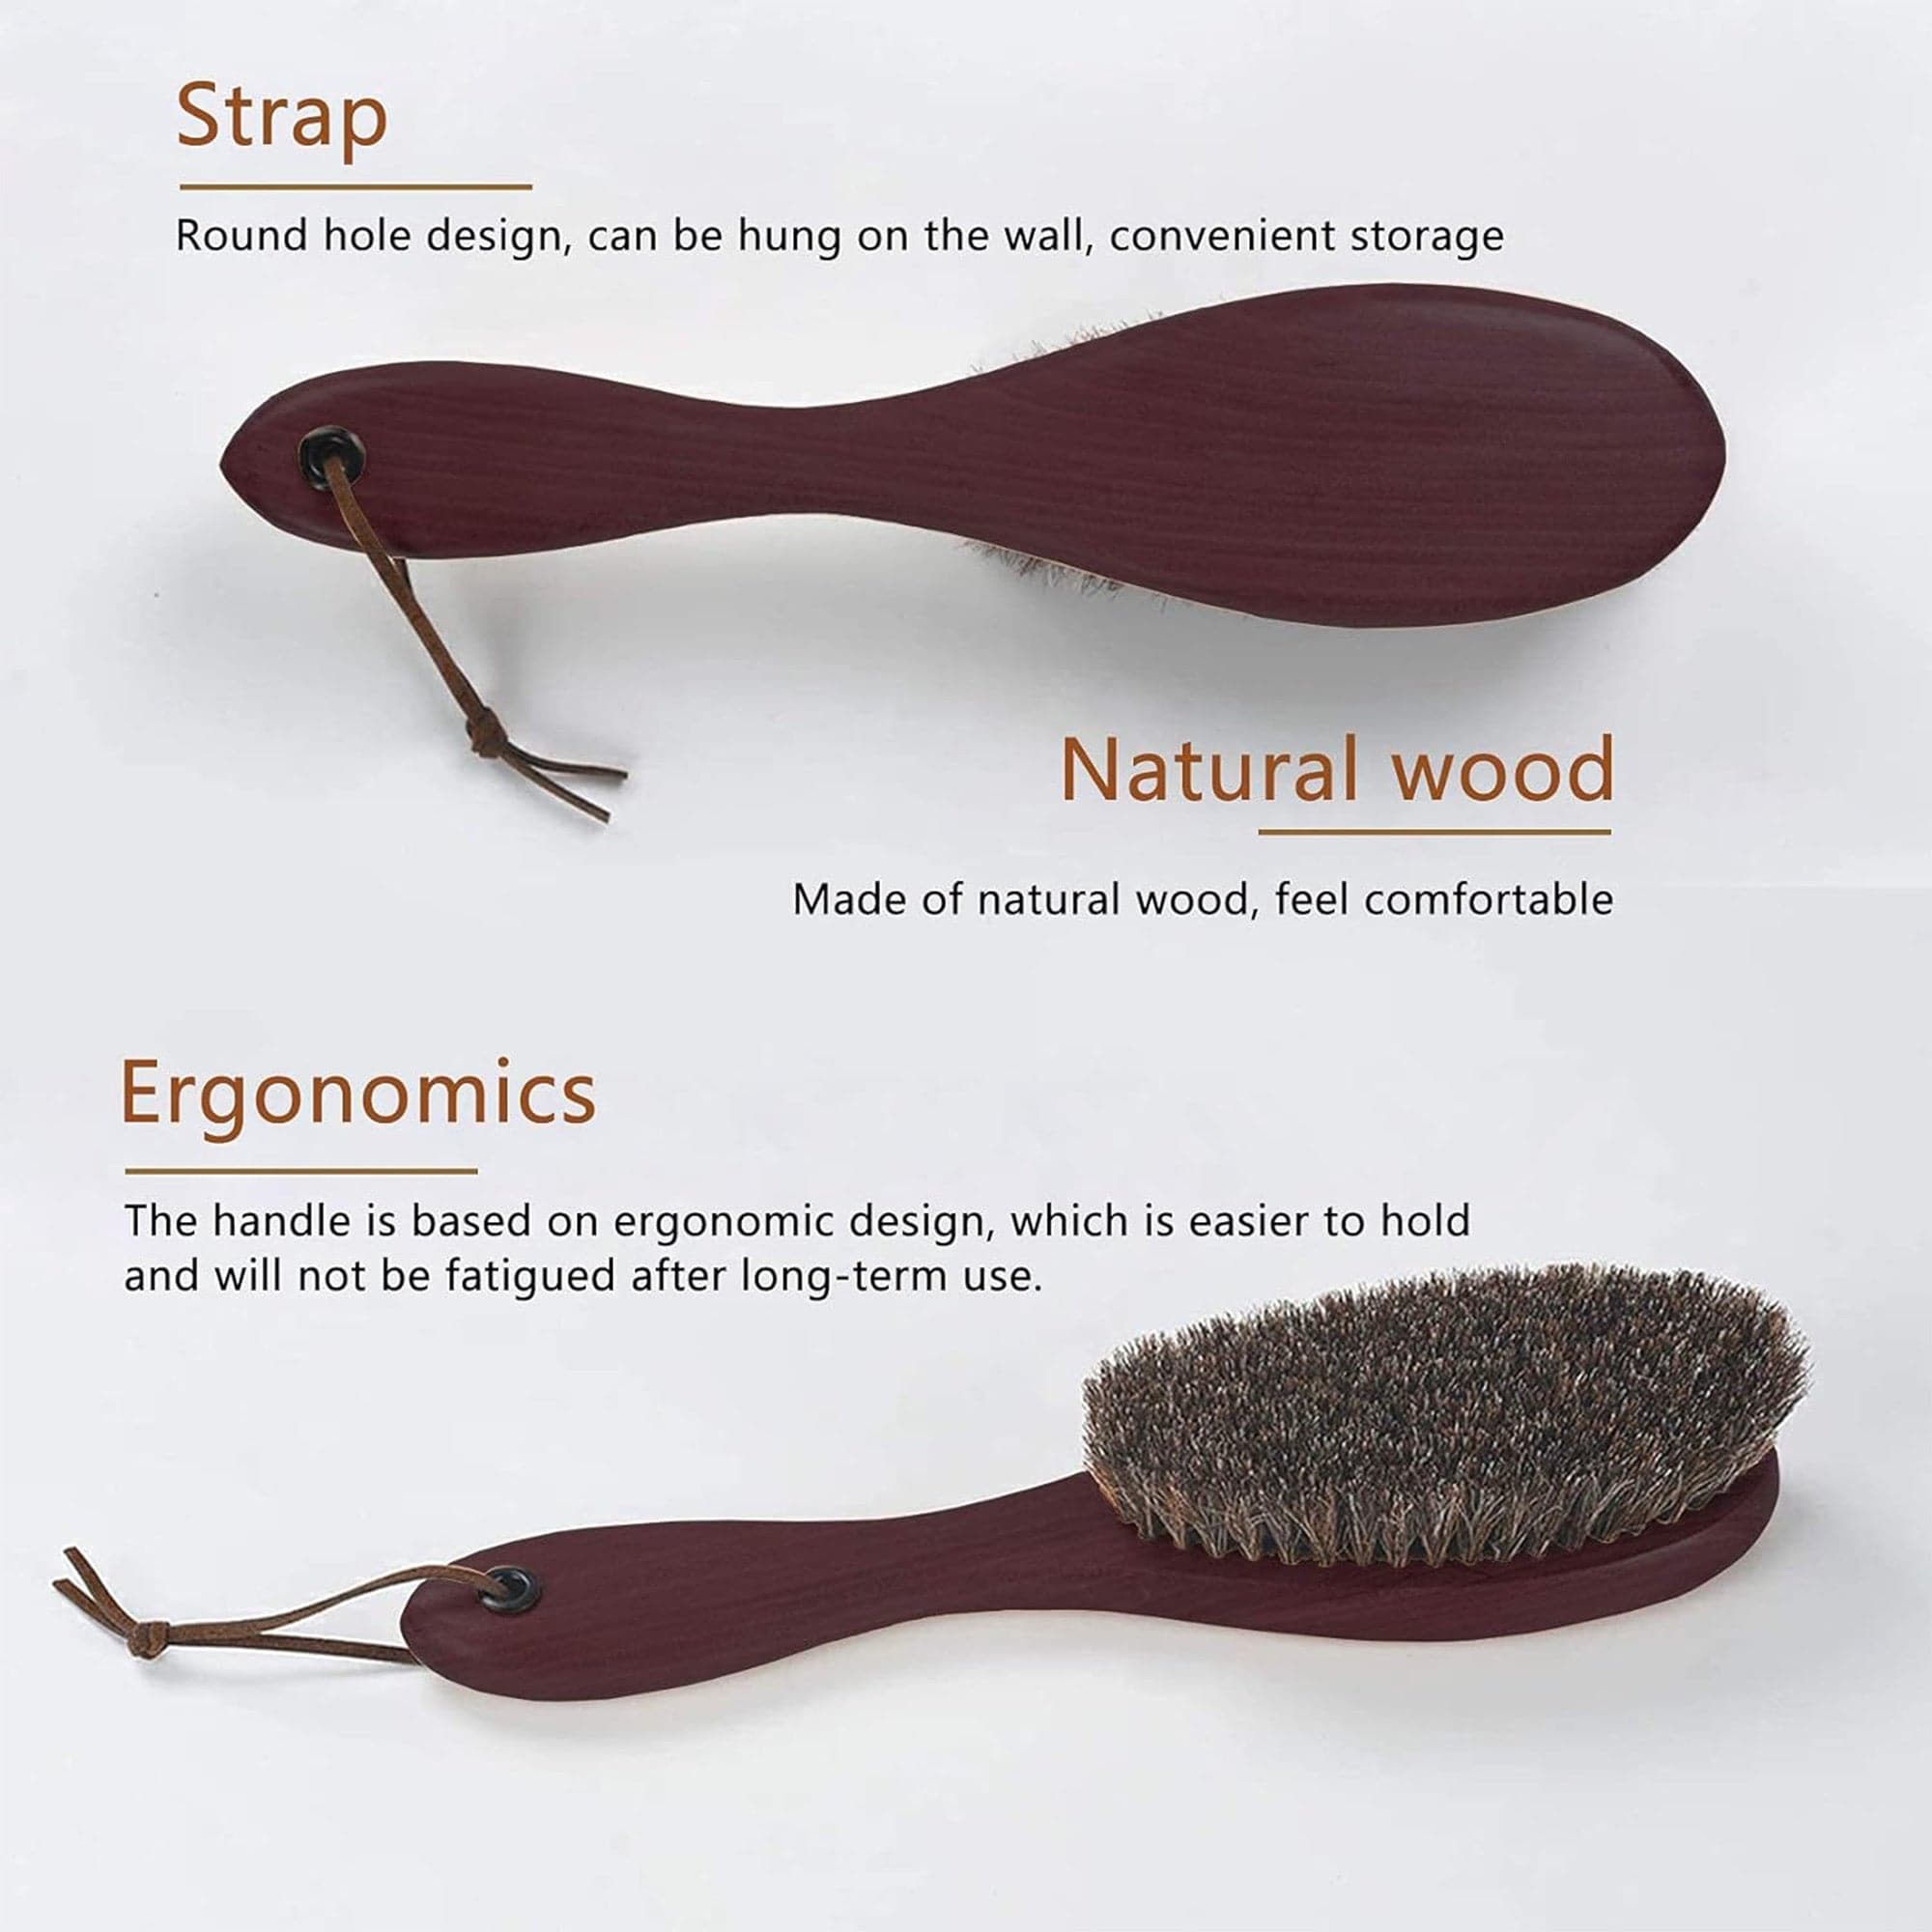 Eson - Fade Brush Long Horse Hair Comfort During Use 23x5cm (Red) - Eson Direct